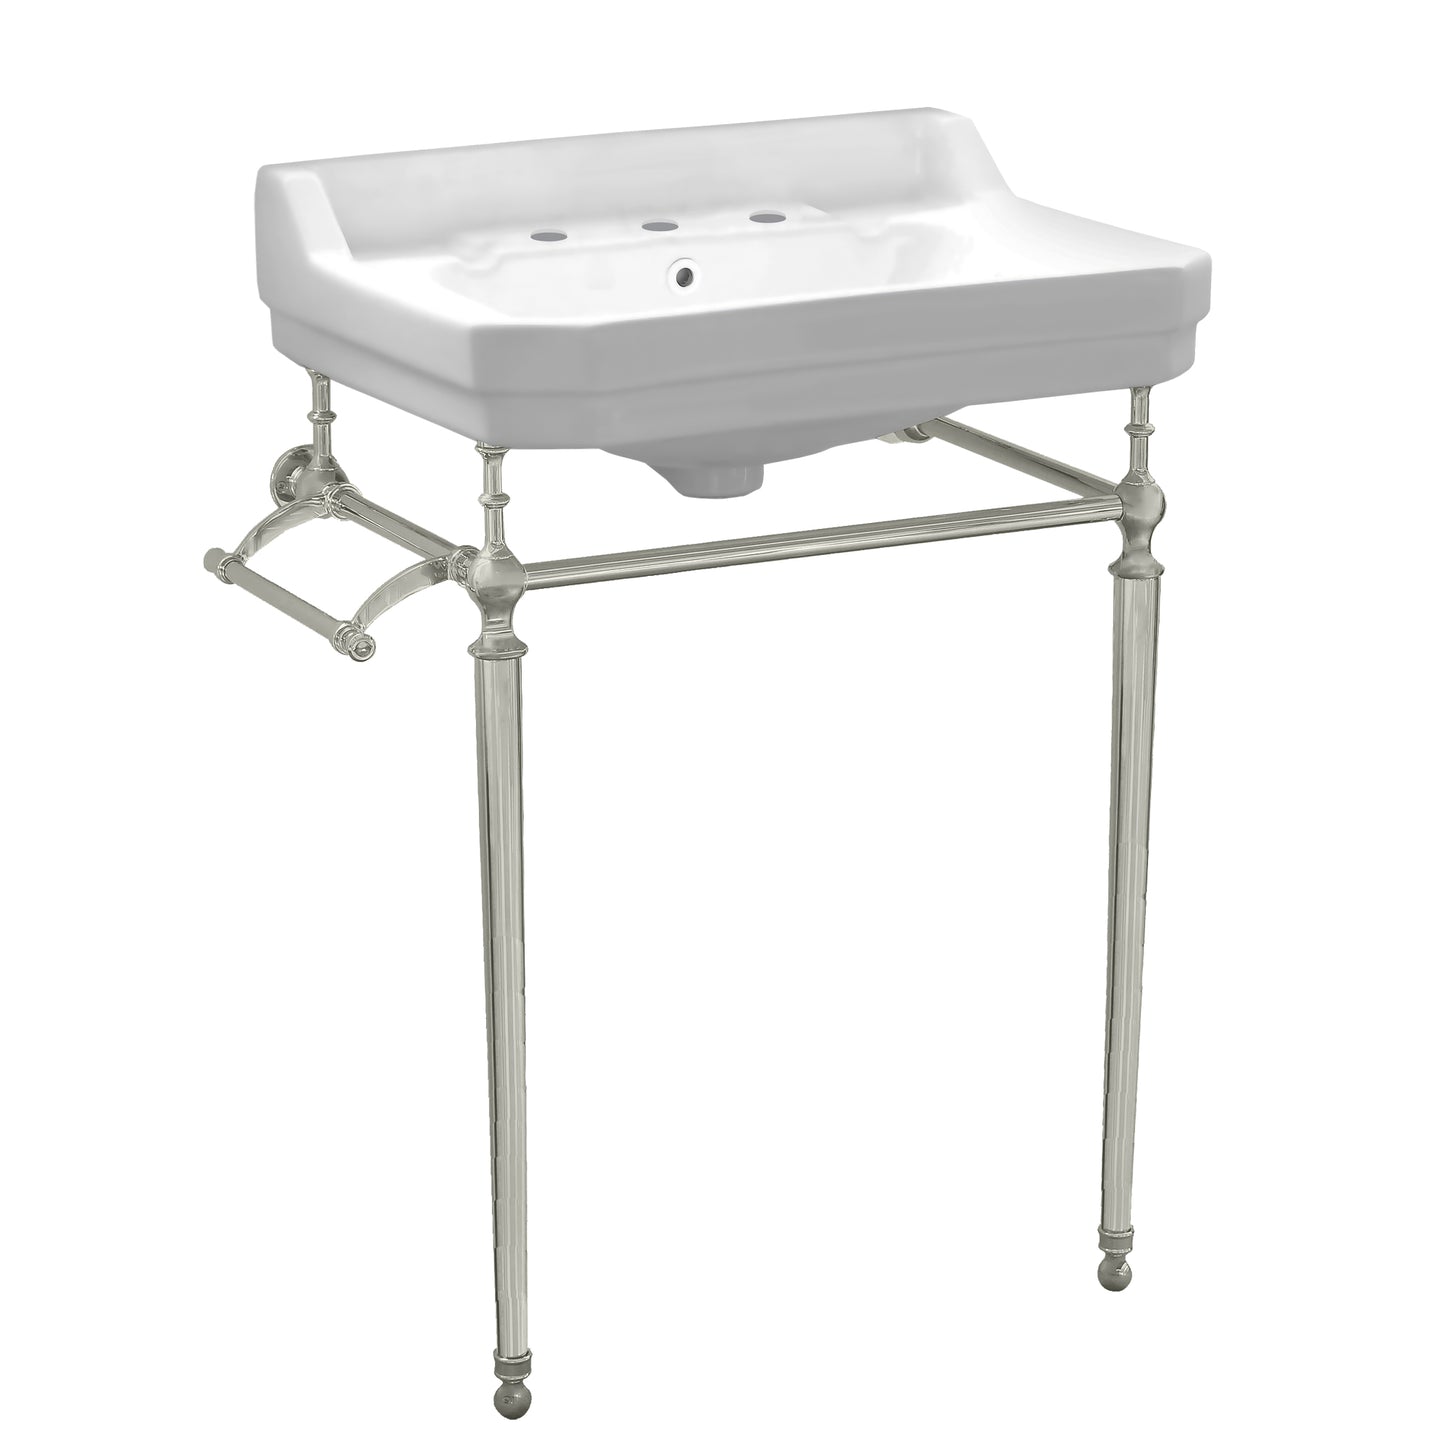 Victoriahaus console with integrated rectangular bowl with widespread hole drill, Brushed Nickel leg support, interchangable towel bar, backsplash and overflow  